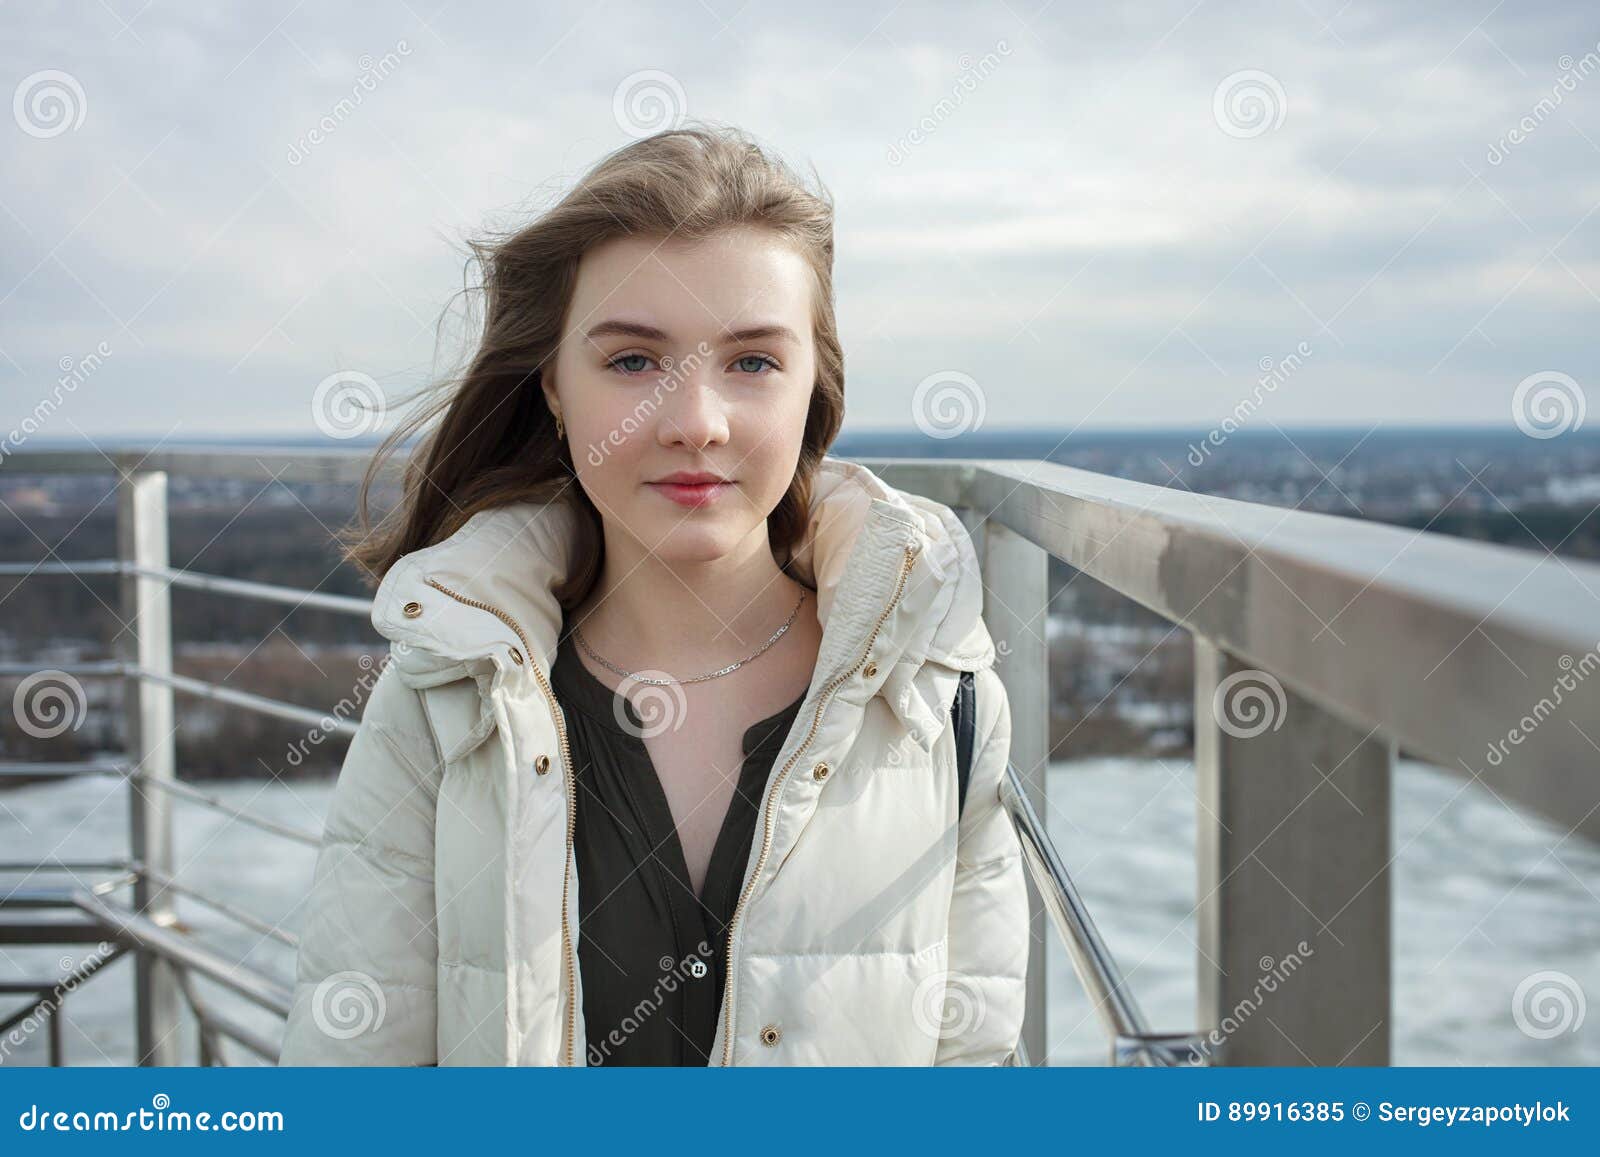 1300px x 957px - Young Adorable Smiling Blonde Teen Girl Having Fun on the Observation Deck  with a View of Cloudy Spring Sky, Frozen River, Sunny W Stock Image - Image  of portrait, height: 89916385